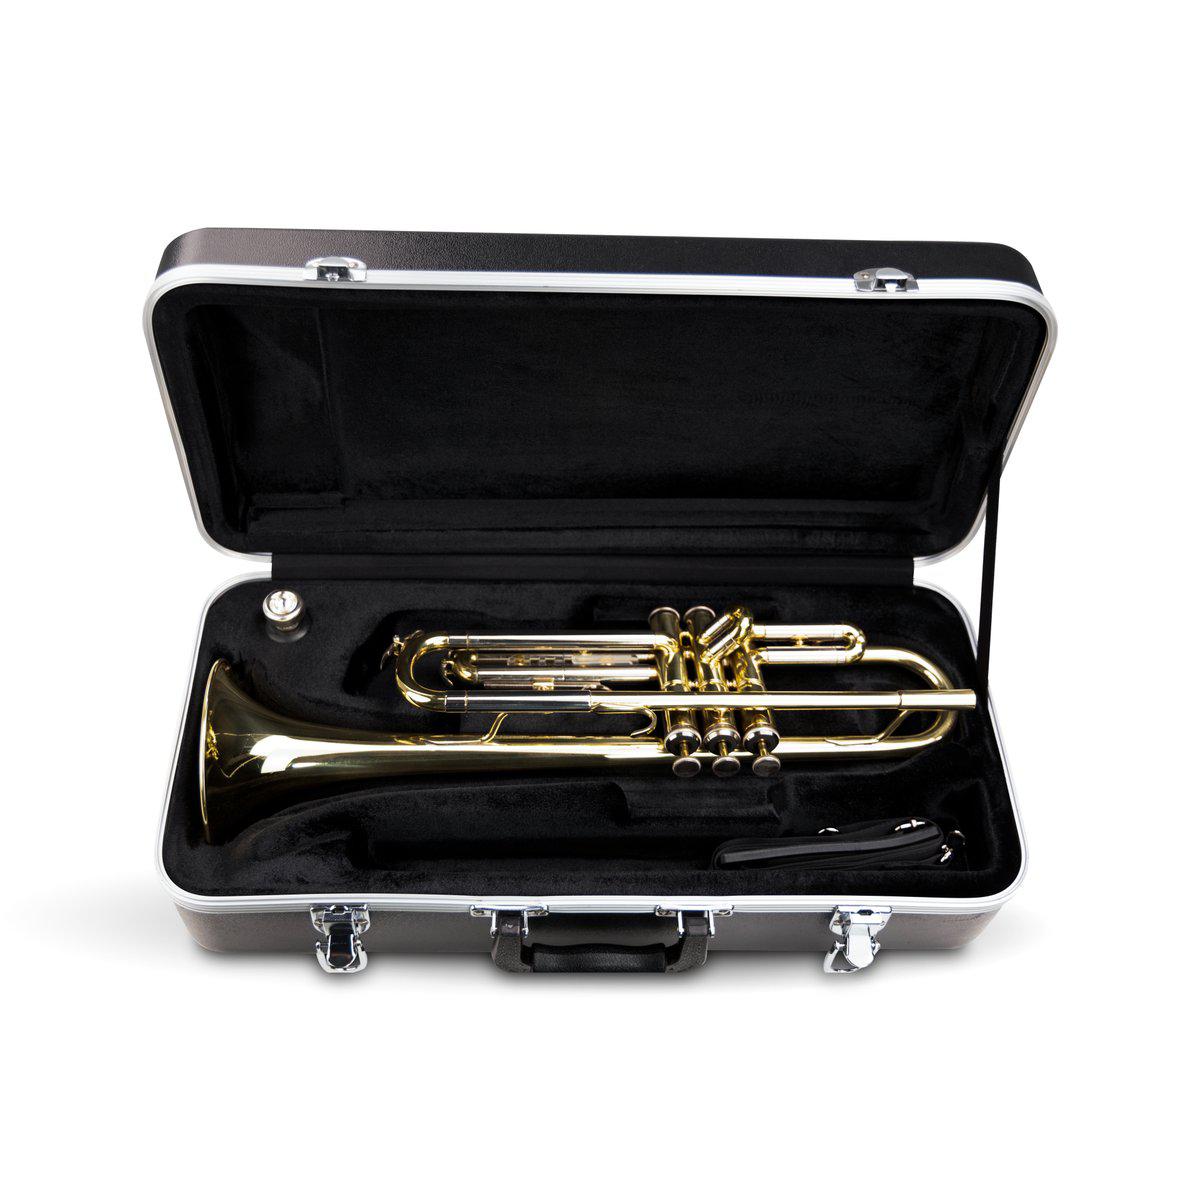 Gator ABS Hardshell Case for Bb Trumpet GCTRUMPET23-Andy's Music